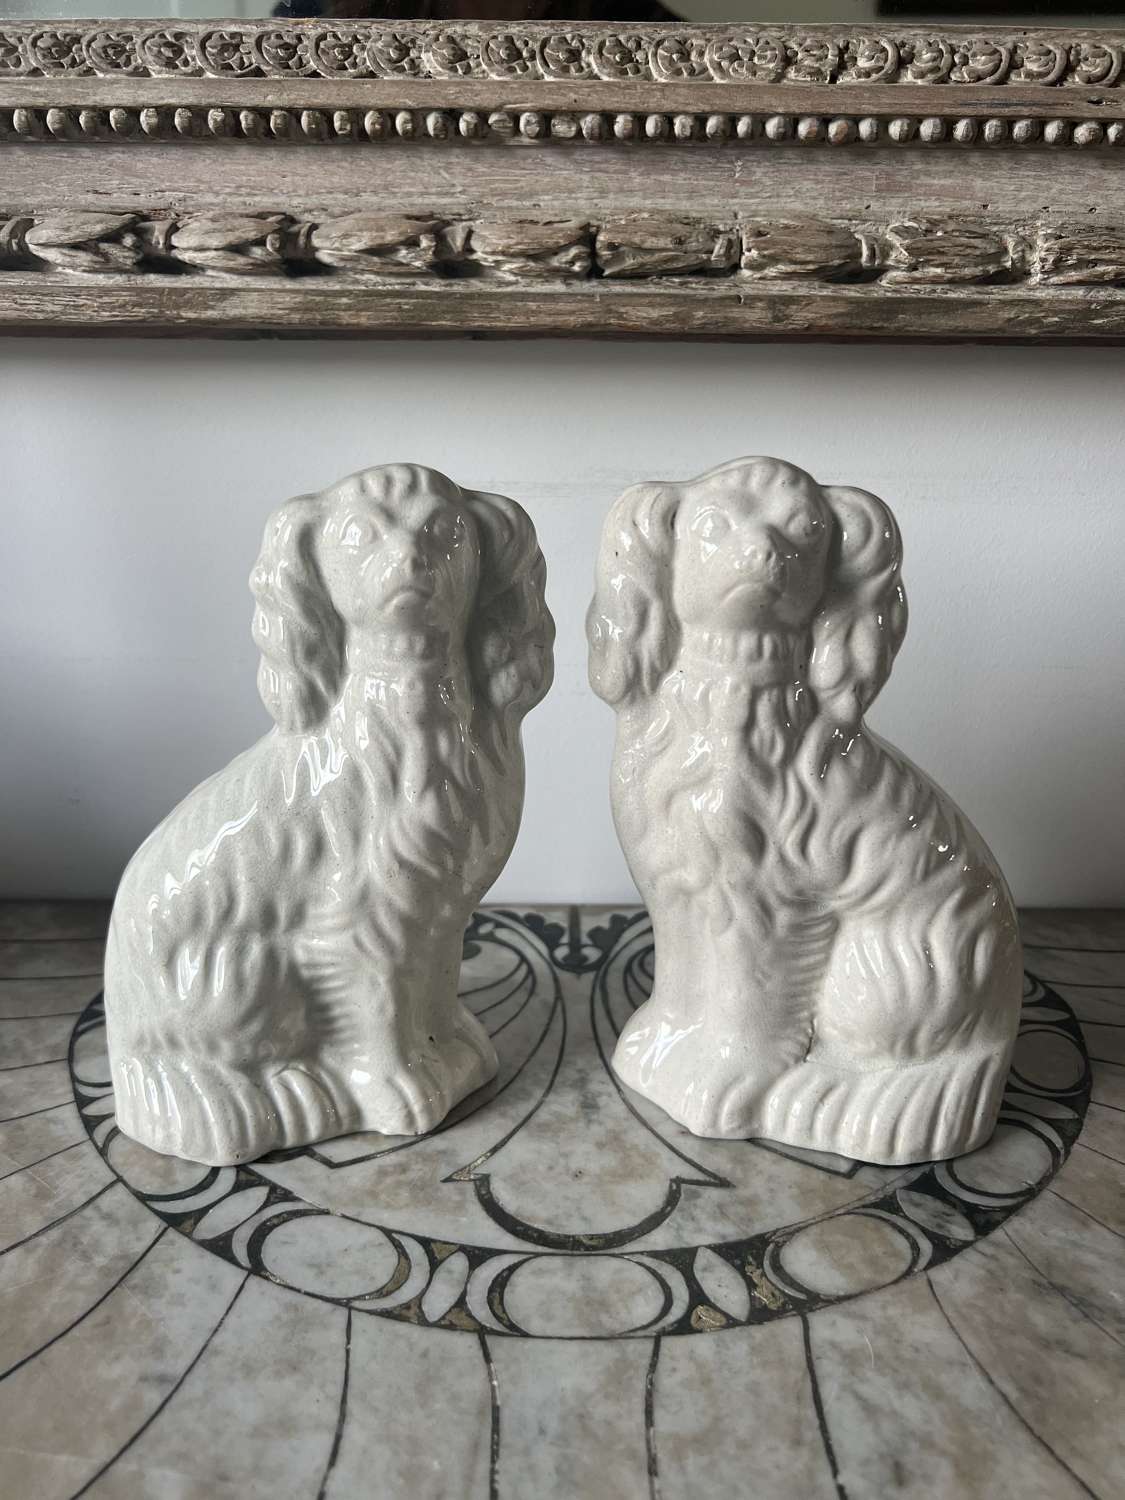 Pair of Victorian Plain White Ironstone Staffordshire Dogs